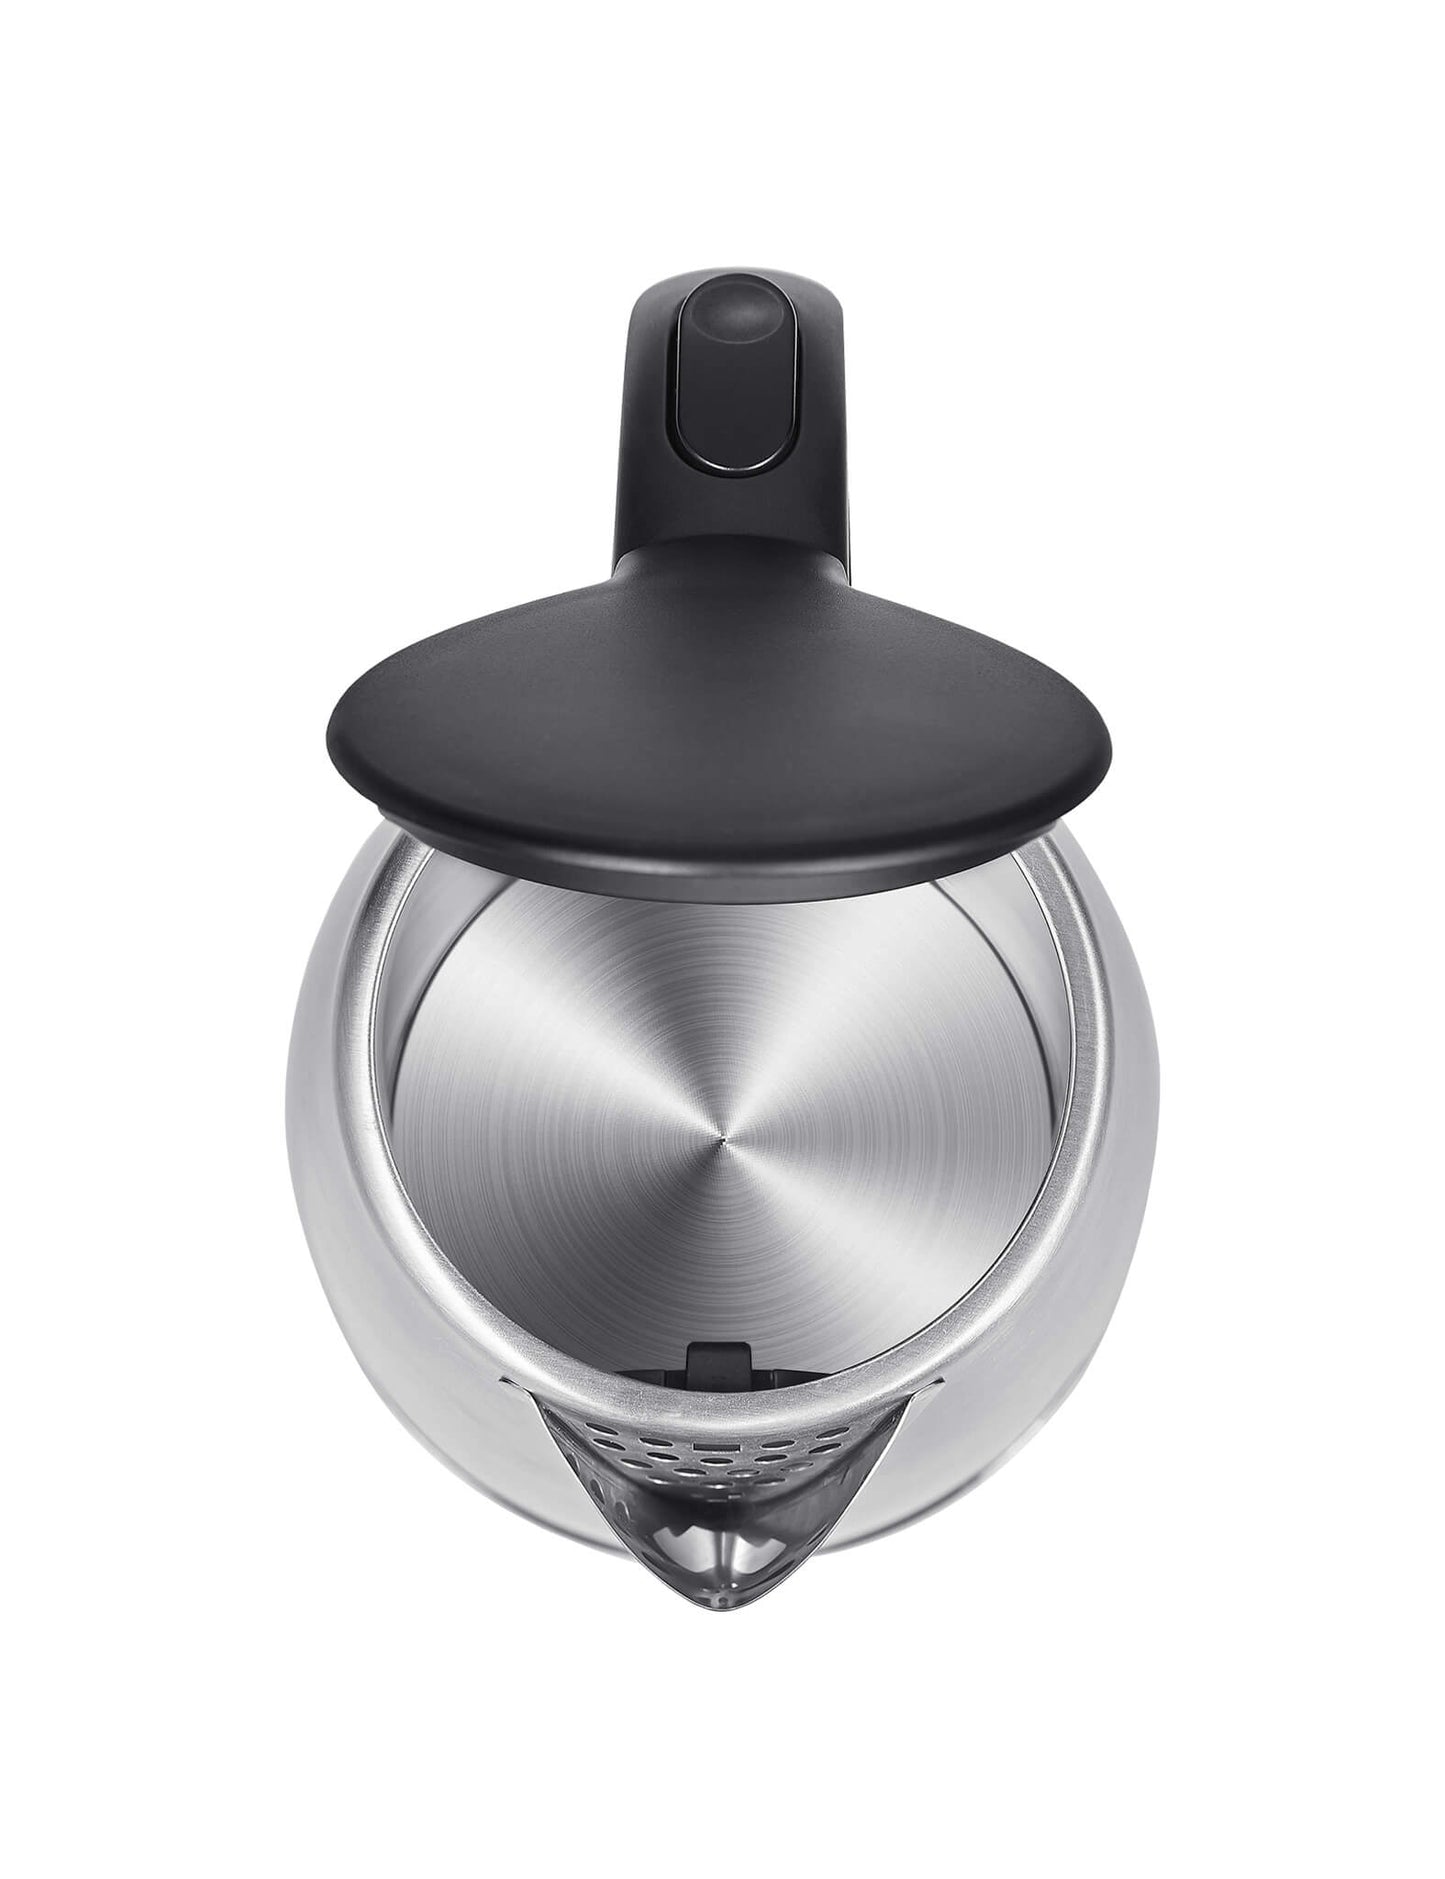 Top view of comfee stainless steel electric kettle